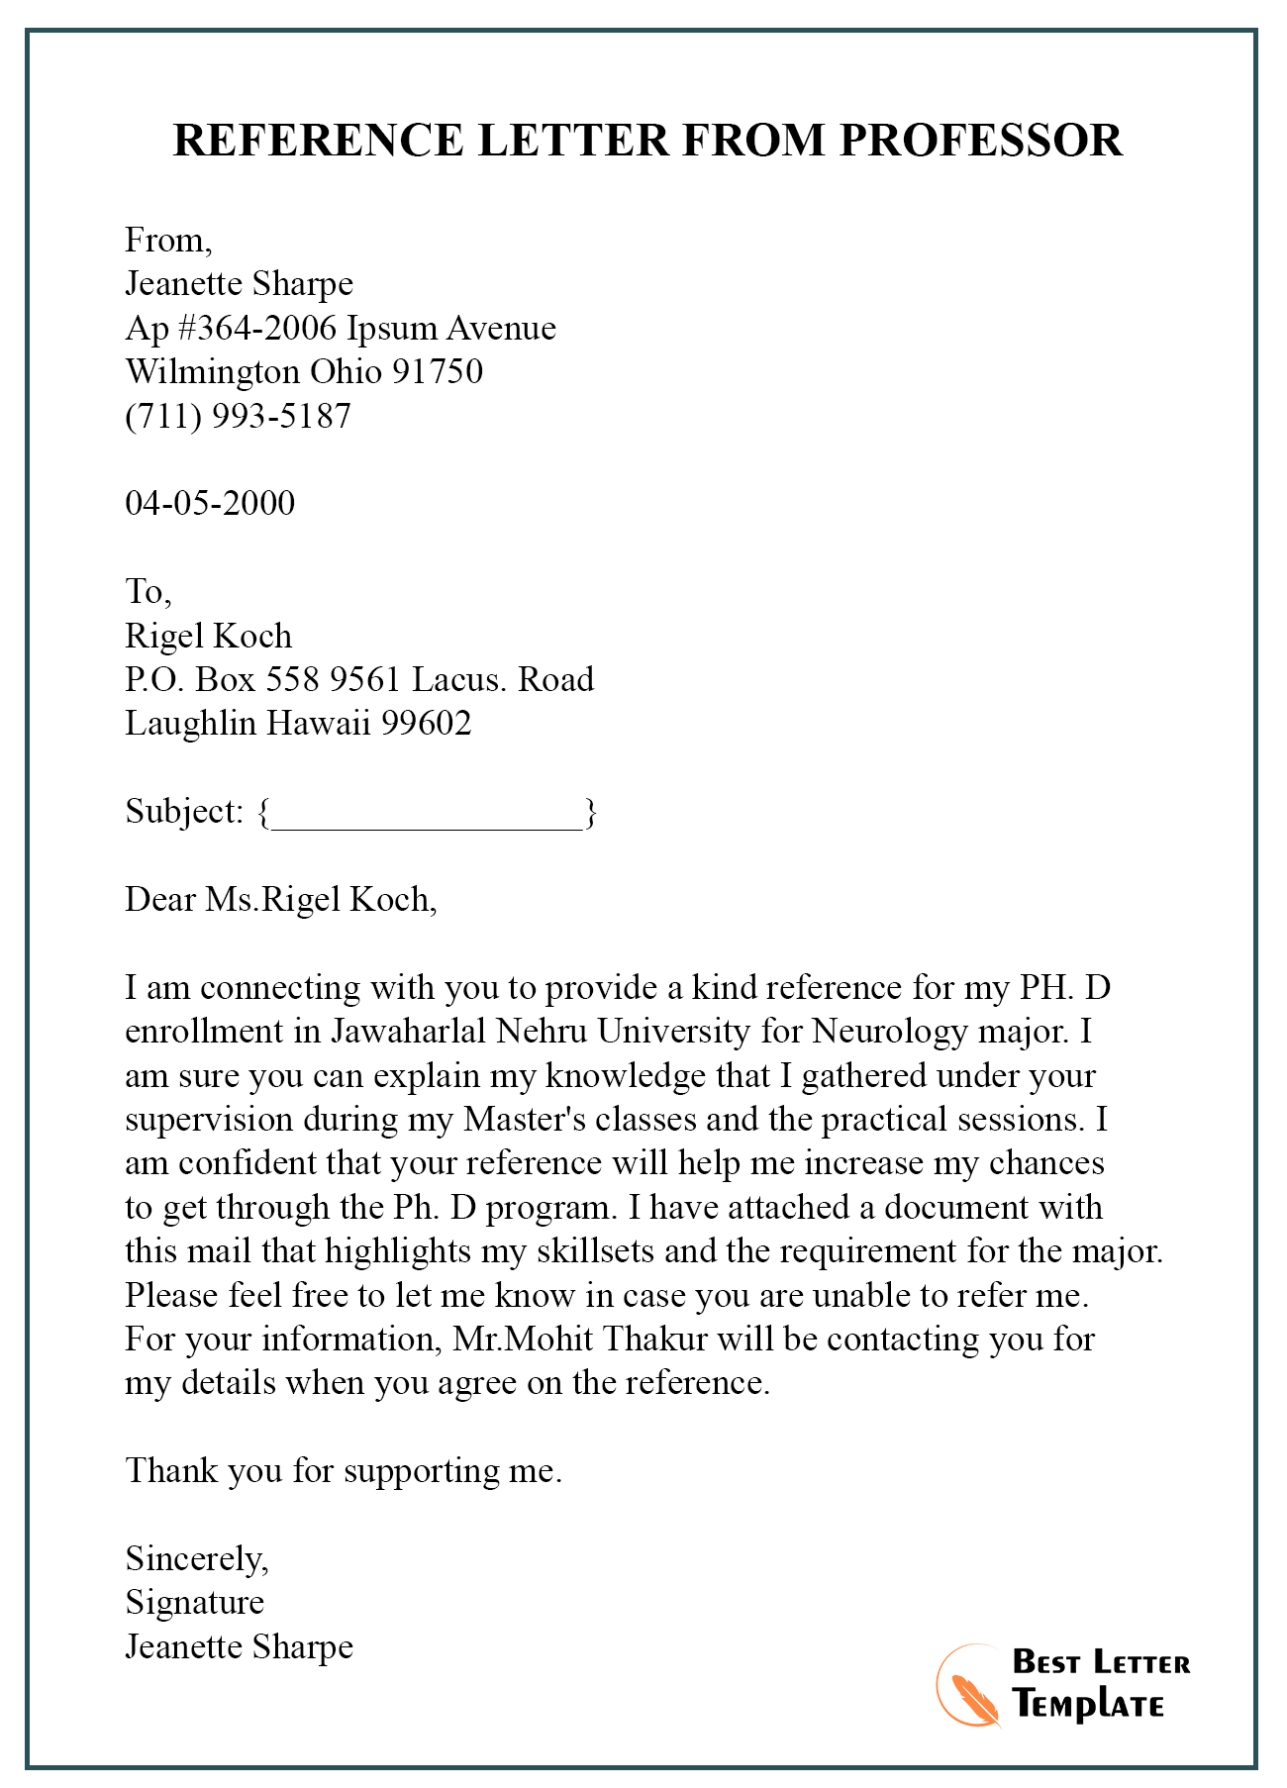 Sample Letter Of Recommendation Request From A Professor • Invitation For Letter Of Recommendation Request Template